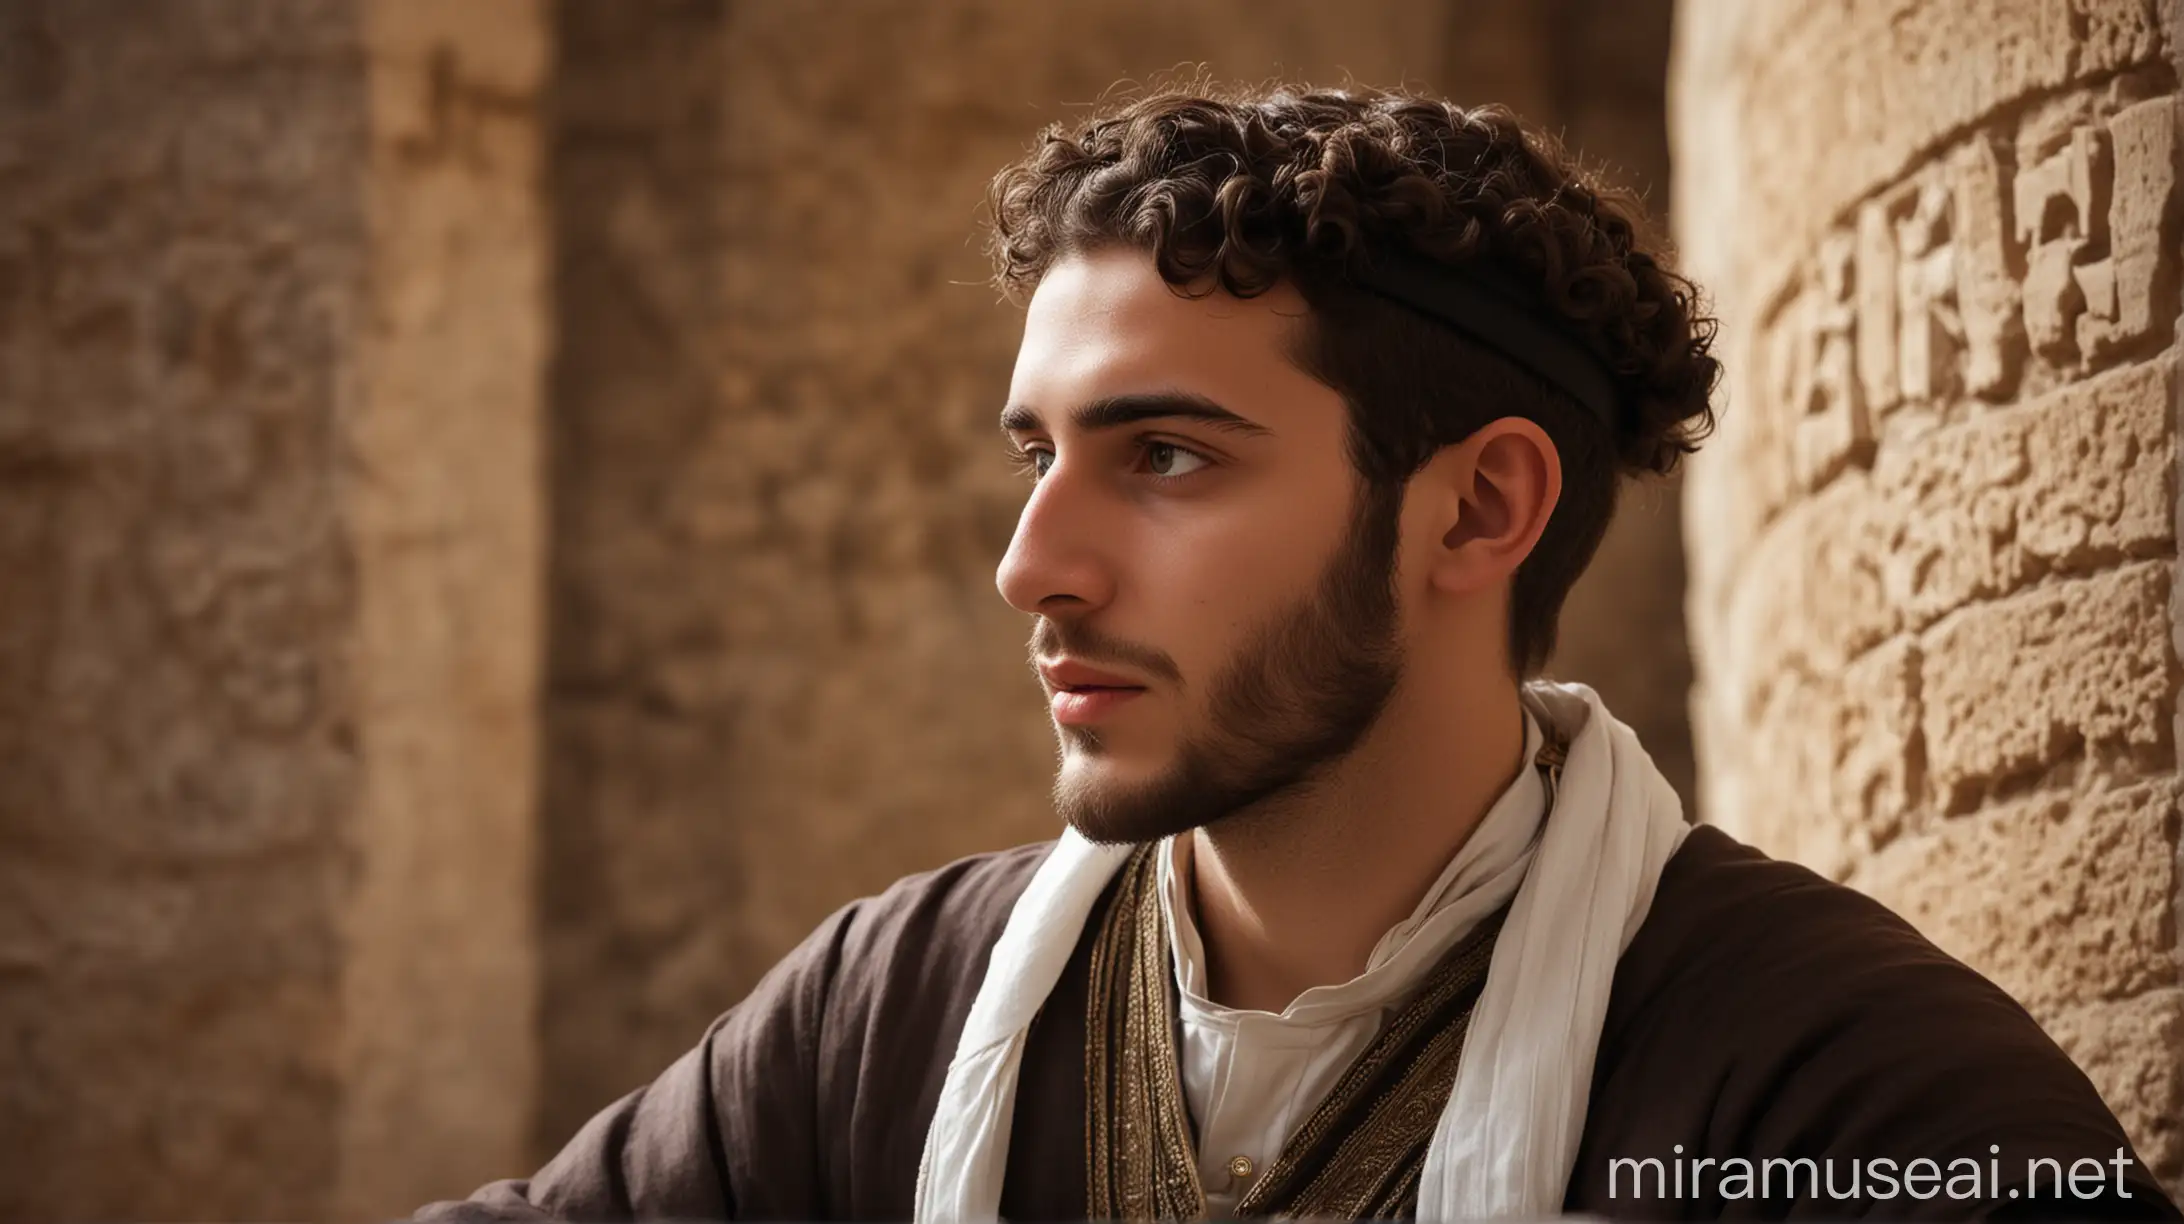 A young Jewish priest in ancient world